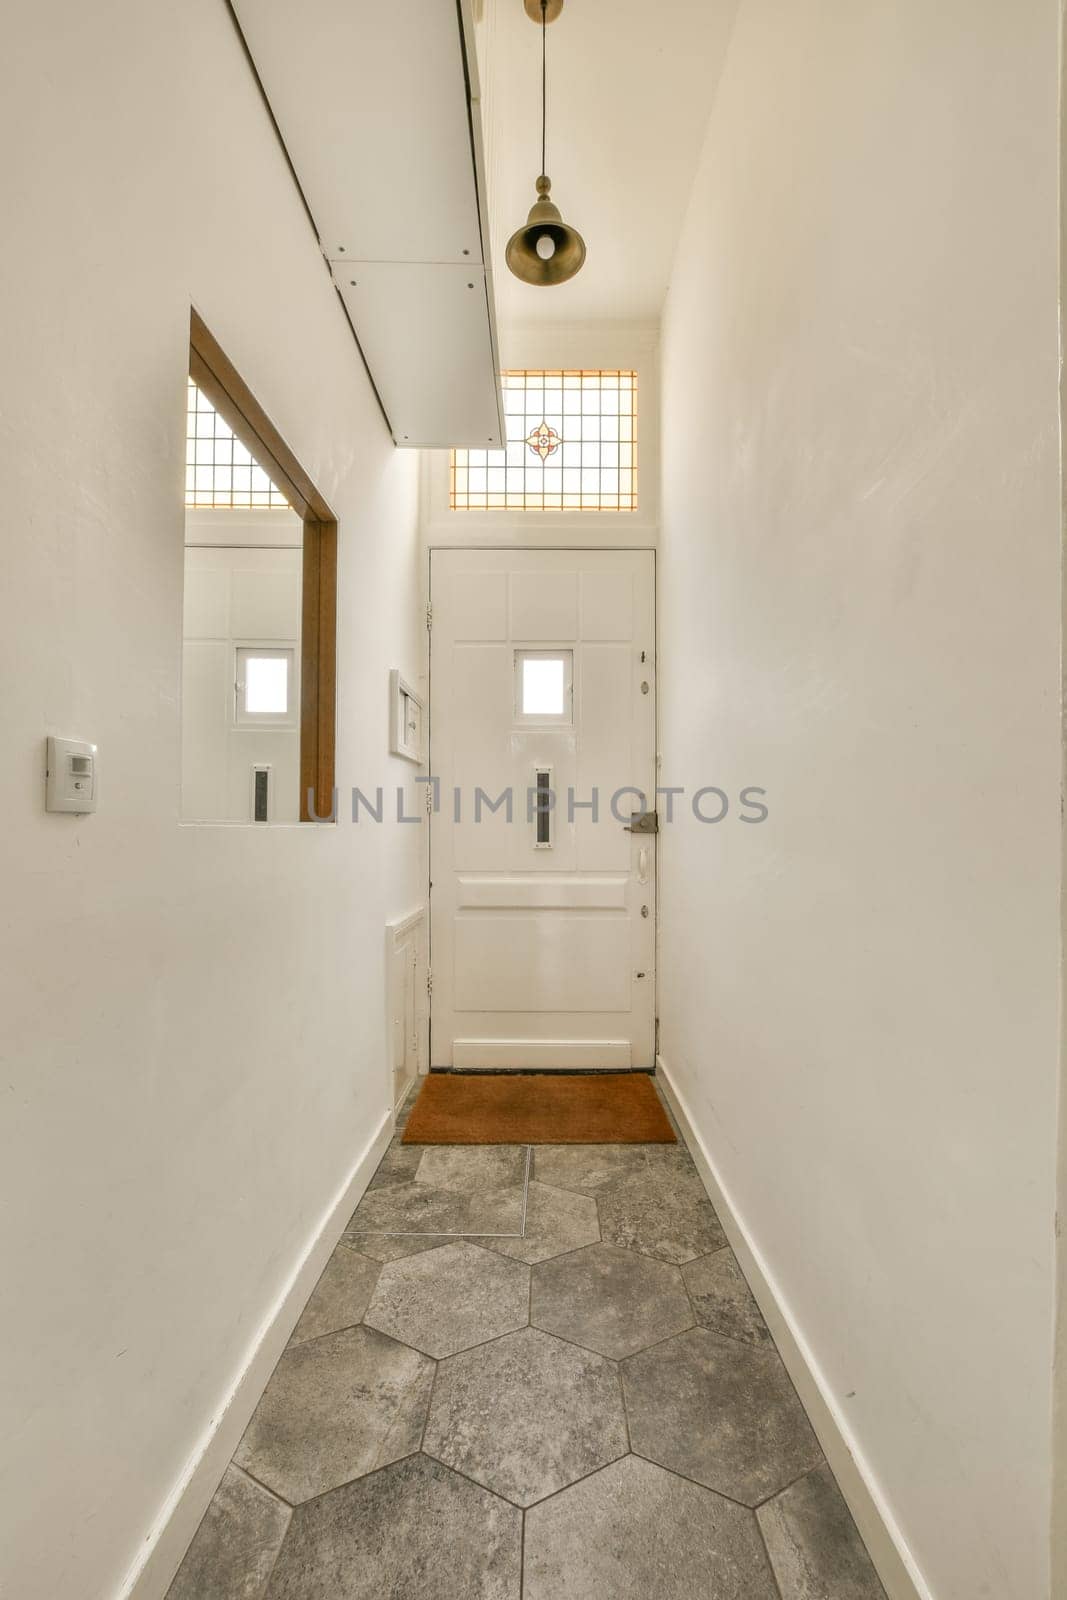 a hallway in a house with white walls and wood trim on the door, light fixture hanging over the doorway